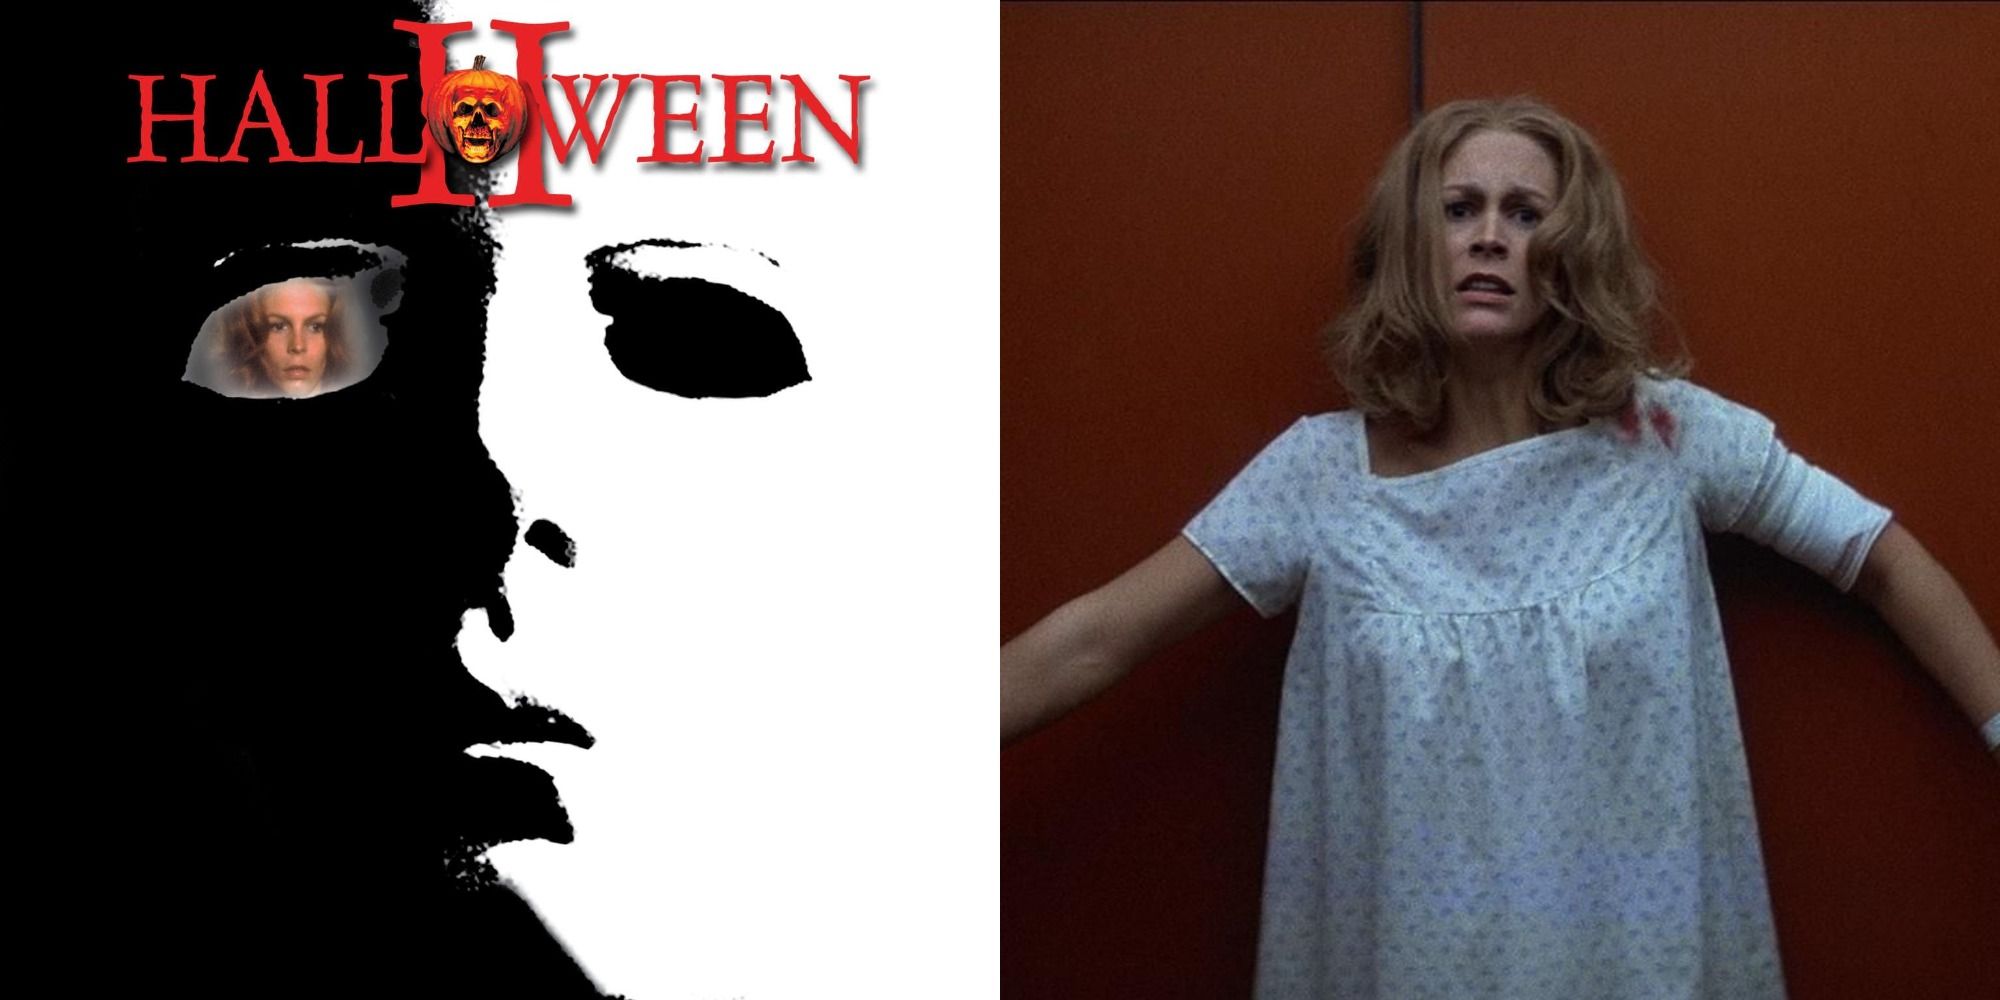 SPlit image showing the poster for Halloween II and Laurie Strode looking scared